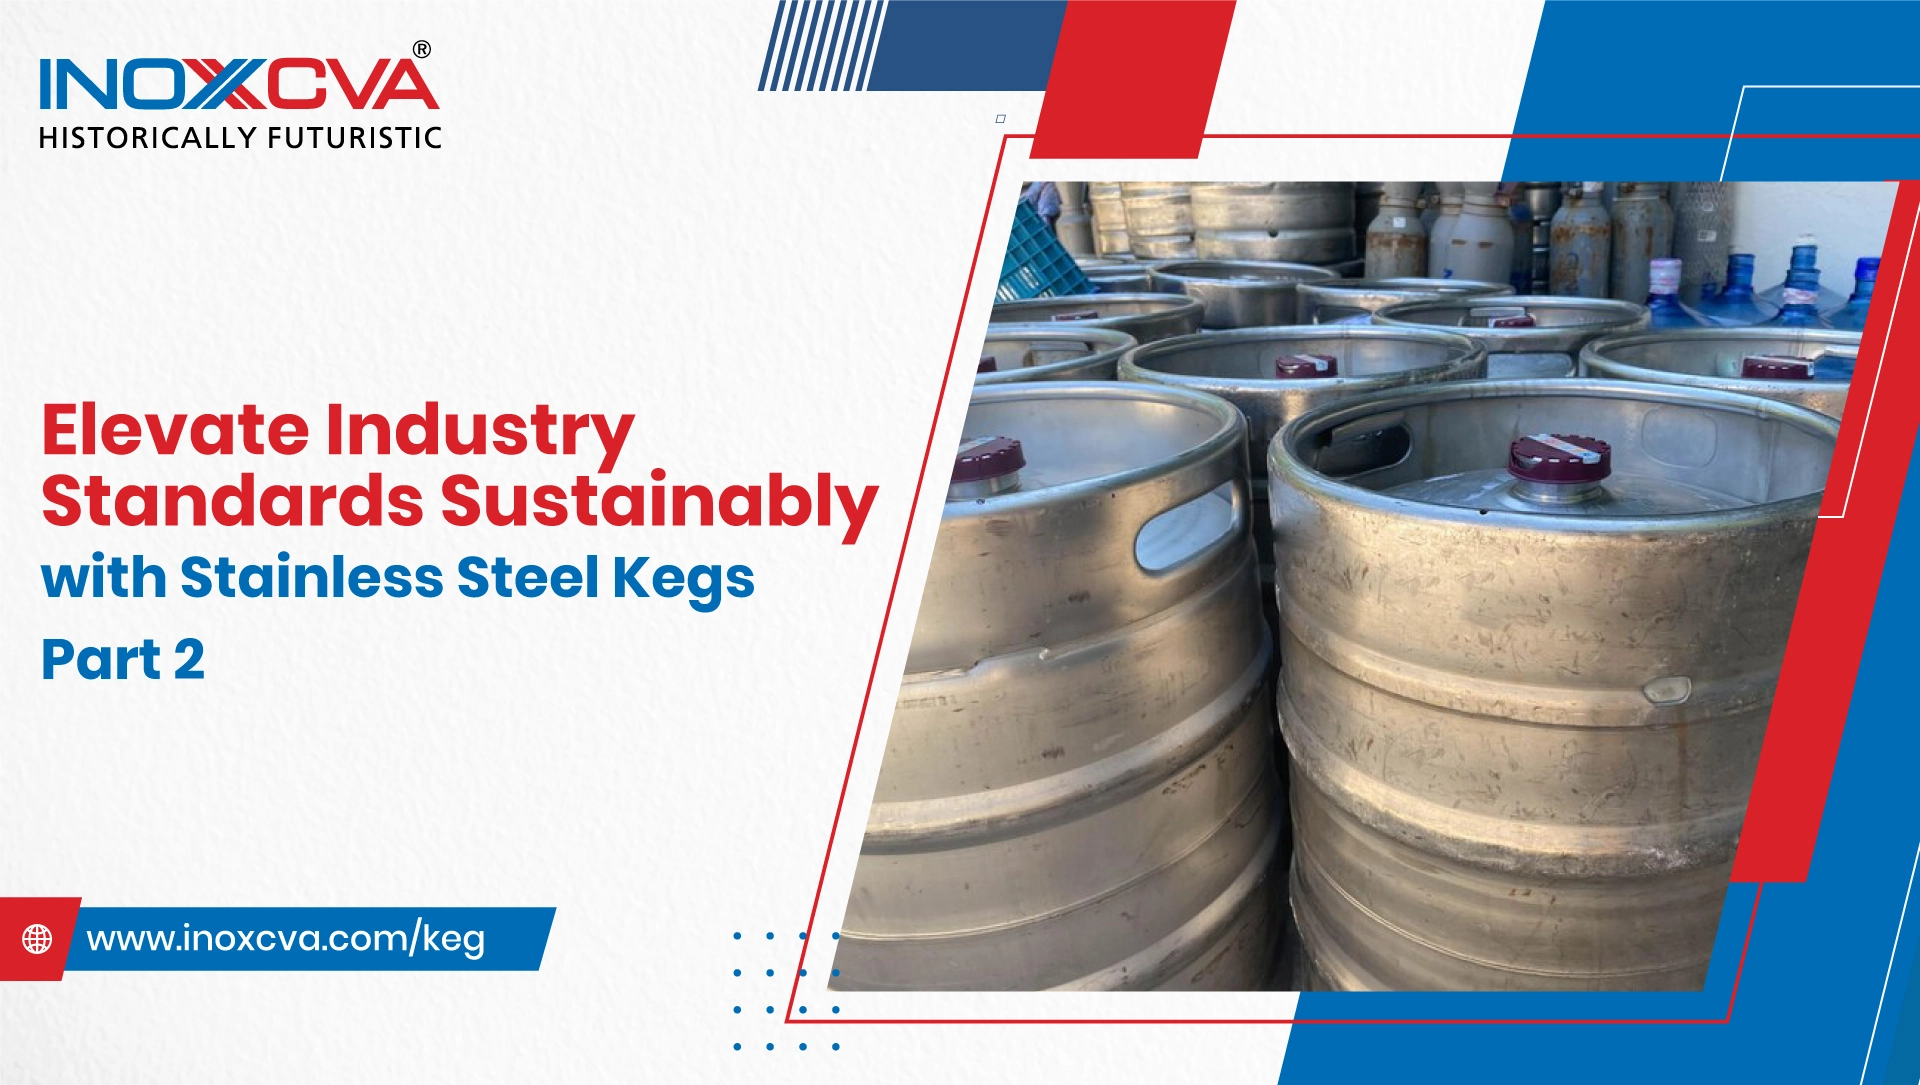 Elevate Industry Standards Sustainably with Stainless Steel Kegs